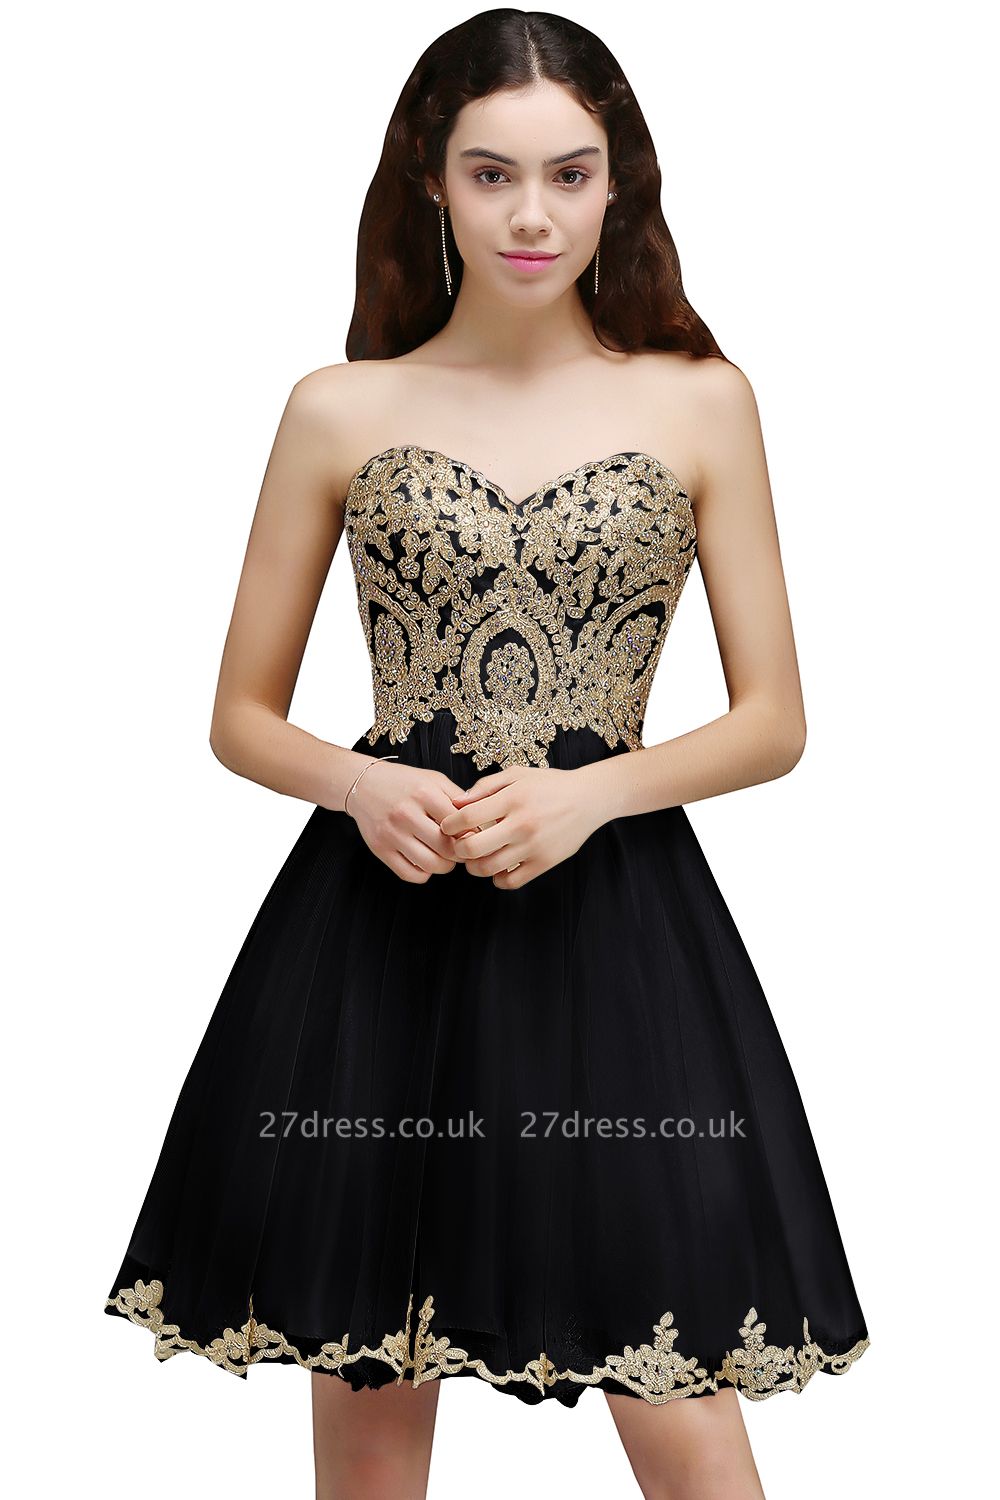 Lovely Sweetheart Short Appliques Lace-Up Homecoming Dress UK